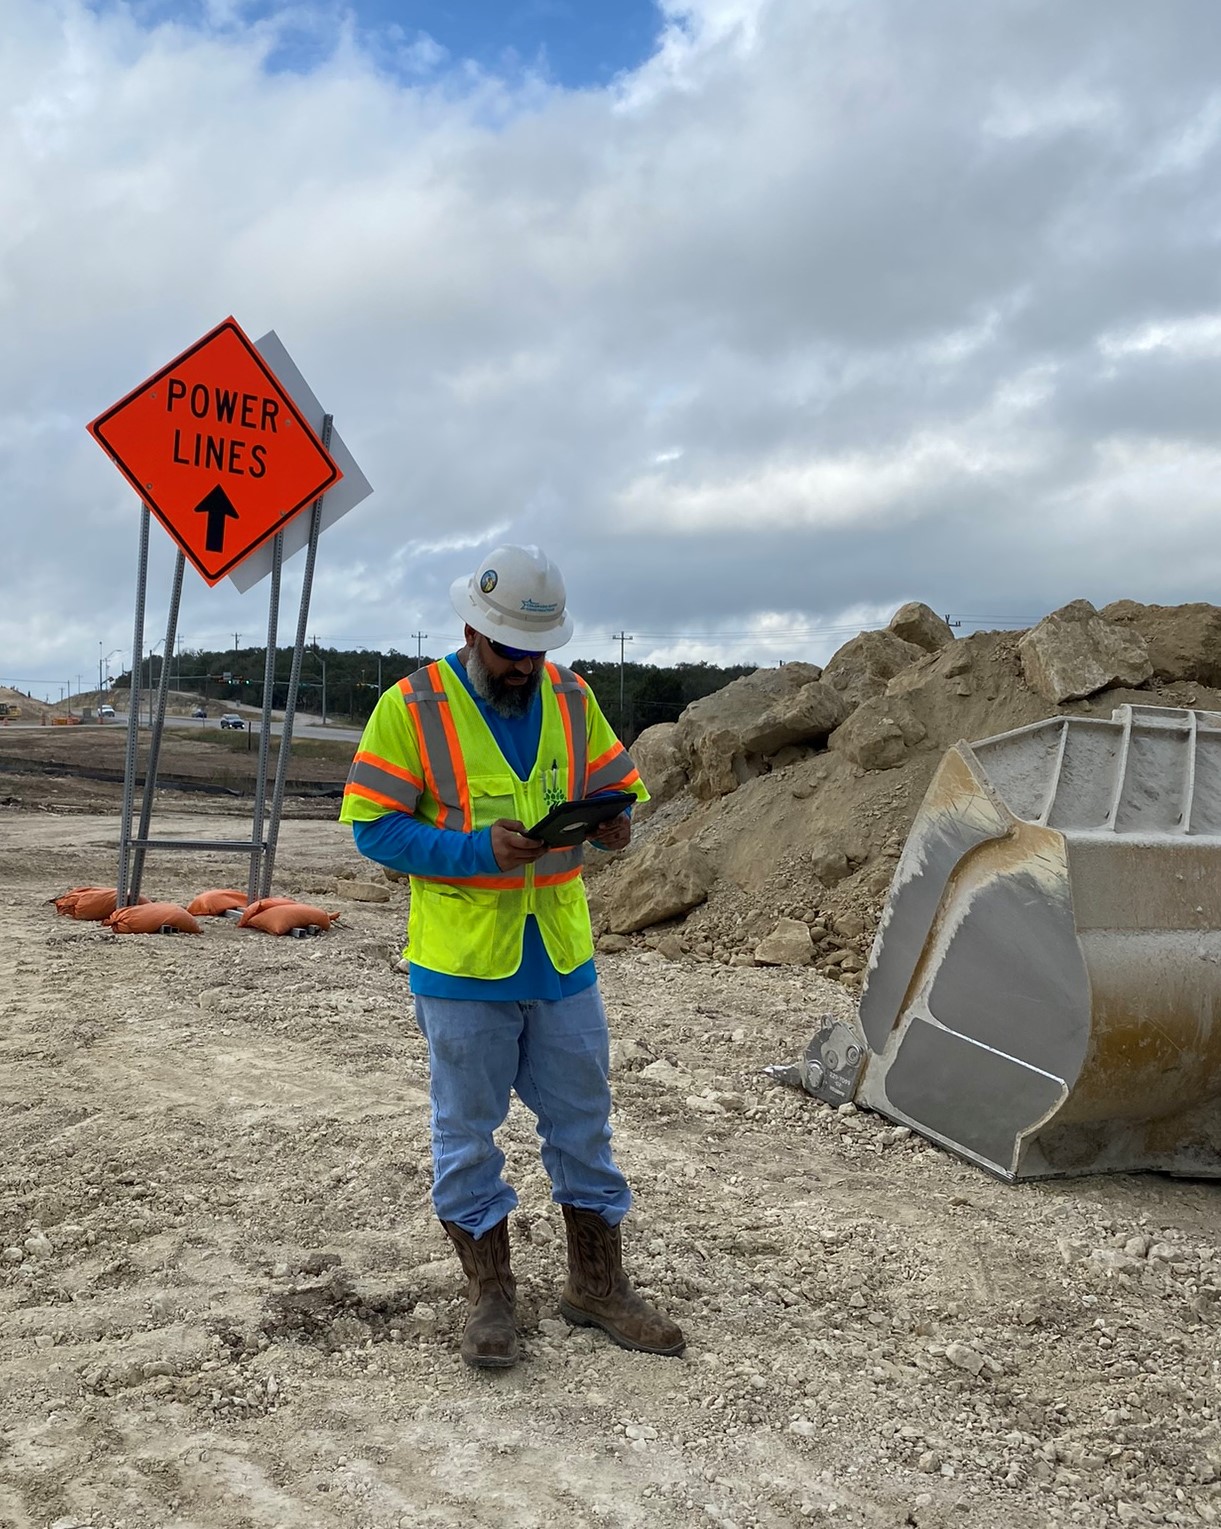 This earthwork foreman uses an iPad to manage safety analysis at the start of a workday. Proactive planning, including the placement of signage to alert workers to nearby utility lines, is essential to keeping construction teams as well as the public safe